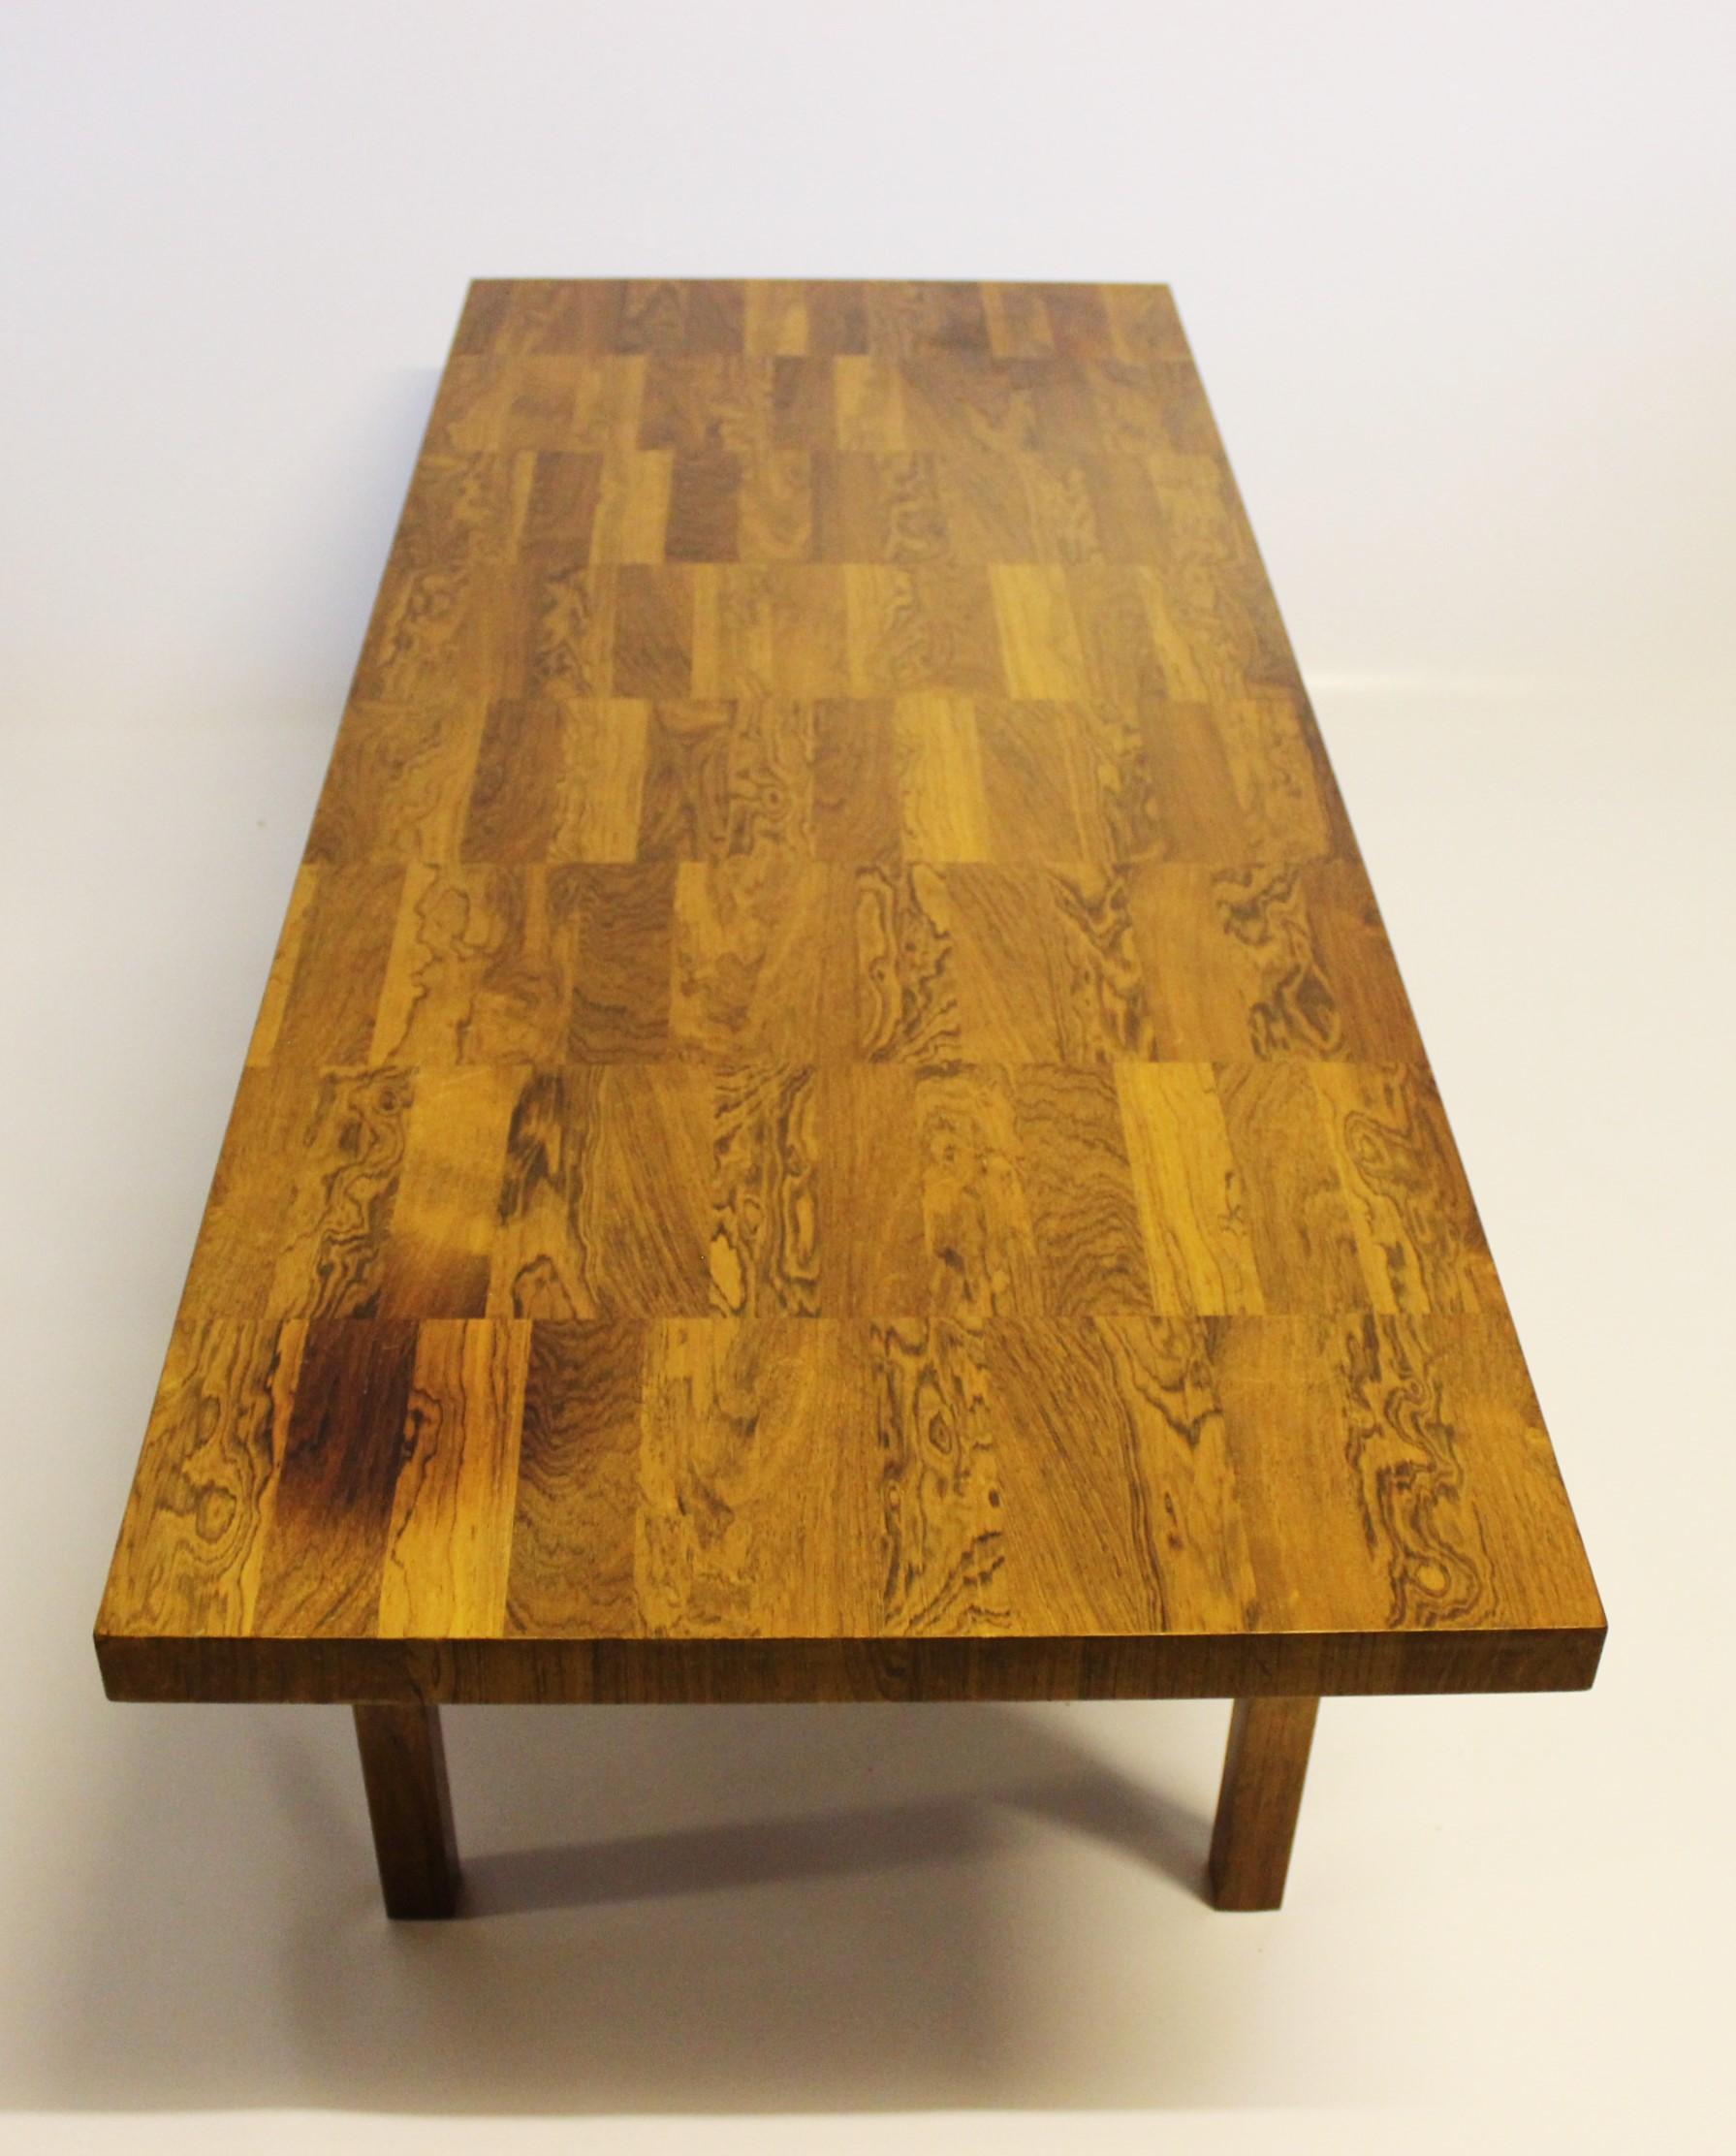 Coffee Table Made In Rosewood With Checkered Pattern, Danish Design From 1960s In Good Condition For Sale In Lejre, DK